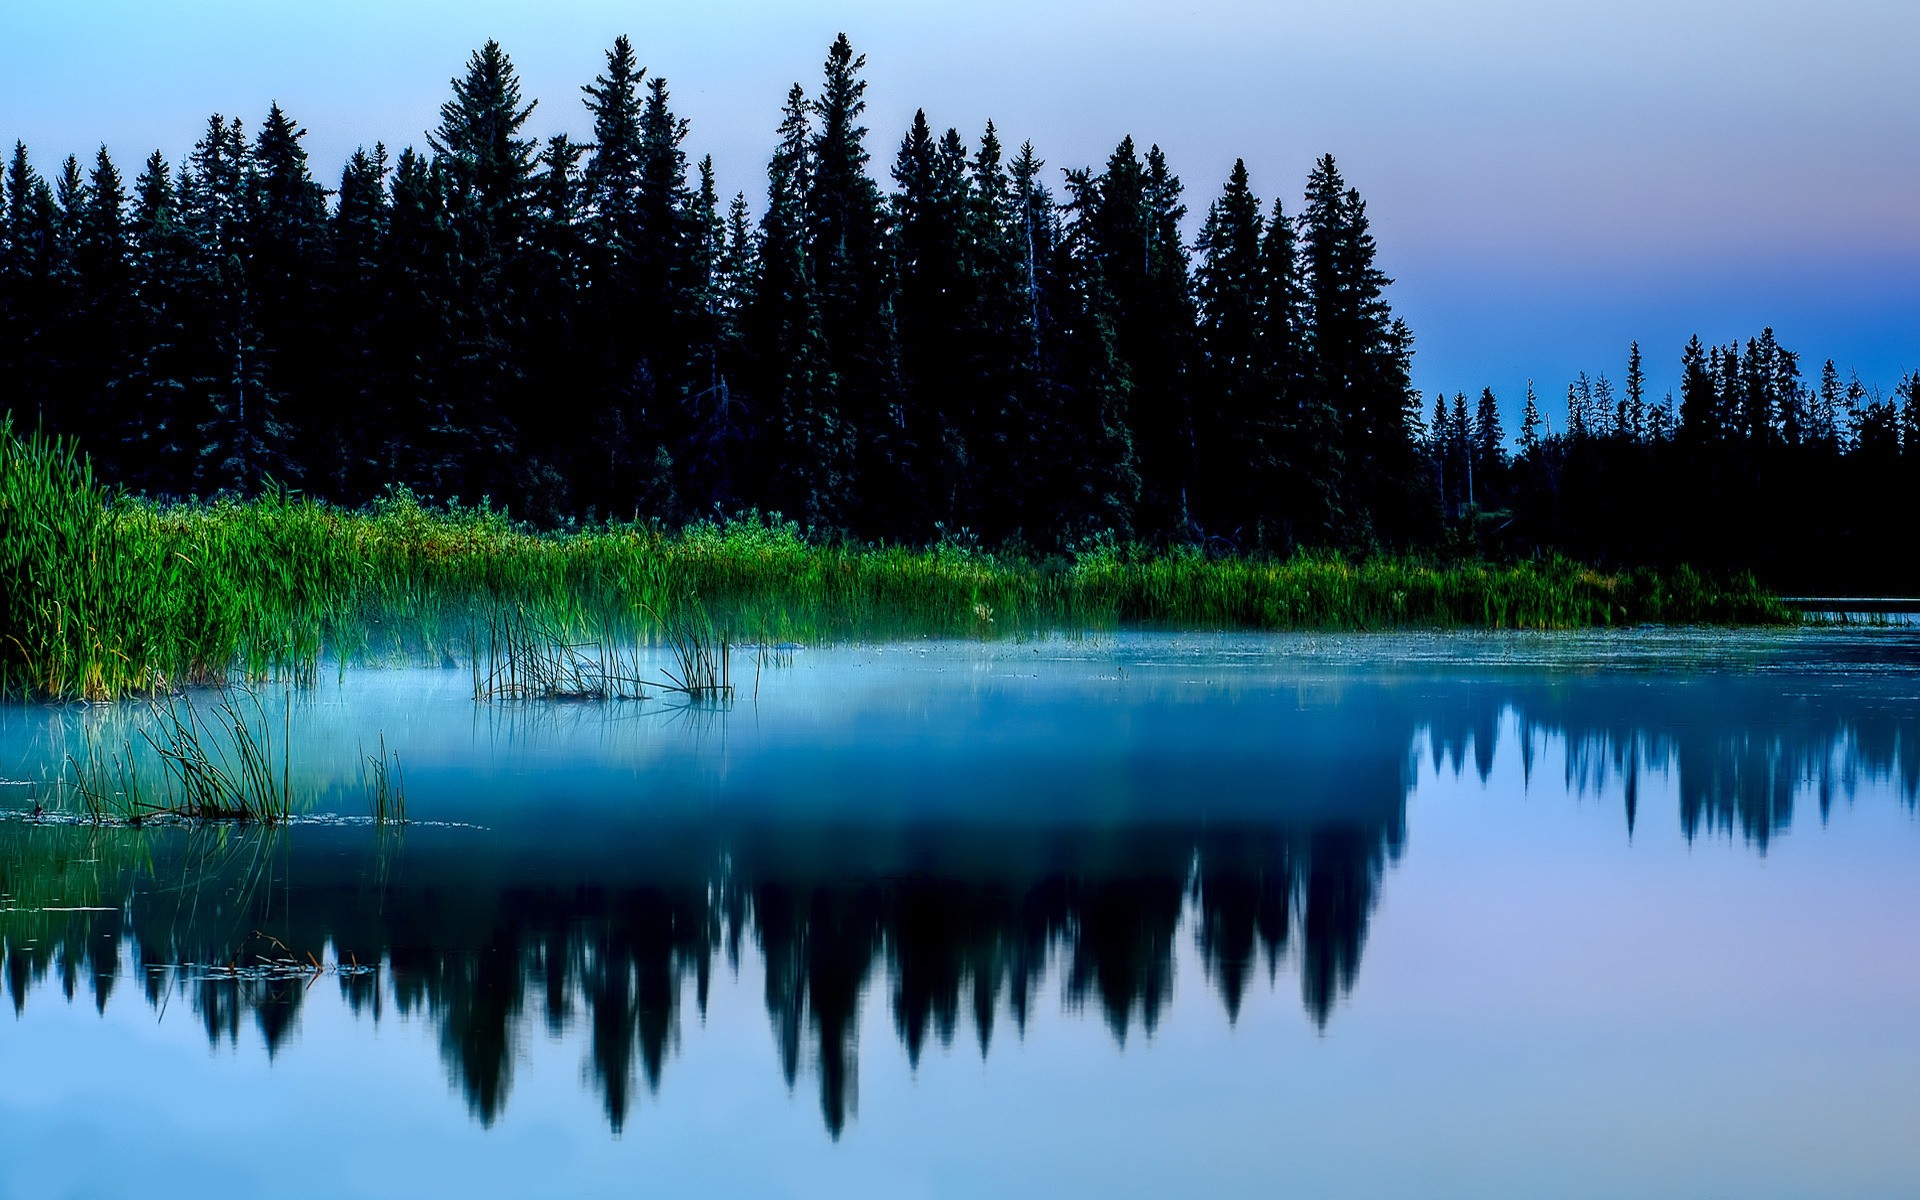 landscapes lake water reflection nature outdoors wood landscape tree river dawn composure background trees sky